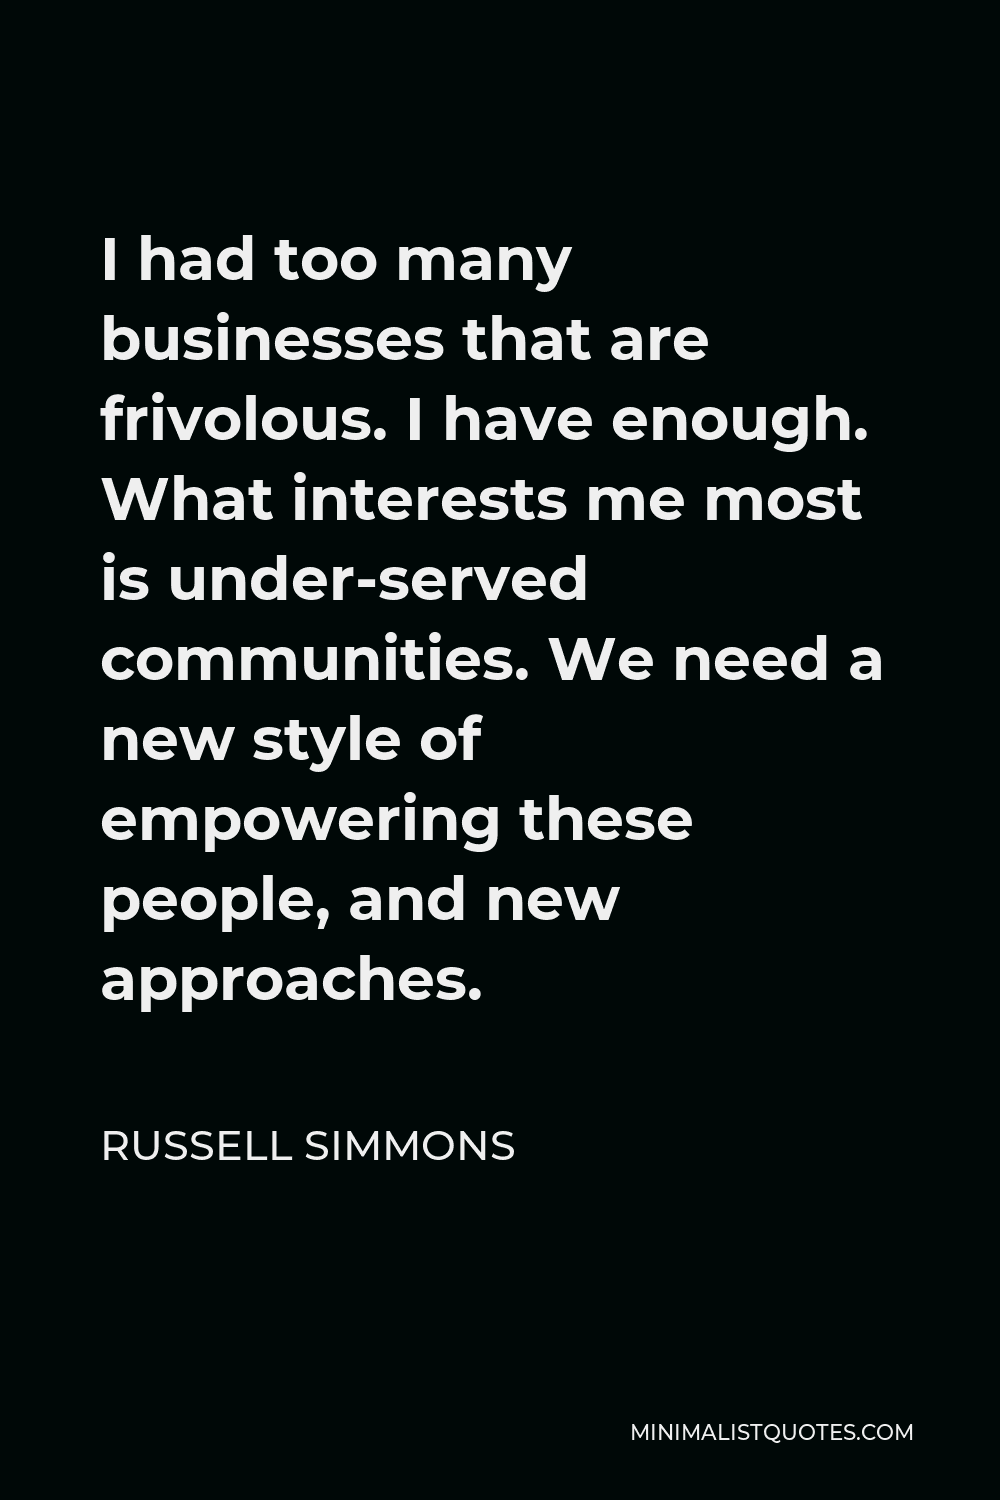 Russell Simmons Quote - I had too many businesses that are frivolous. I have enough. What interests me most is under-served communities. We need a new style of empowering these people, and new approaches.